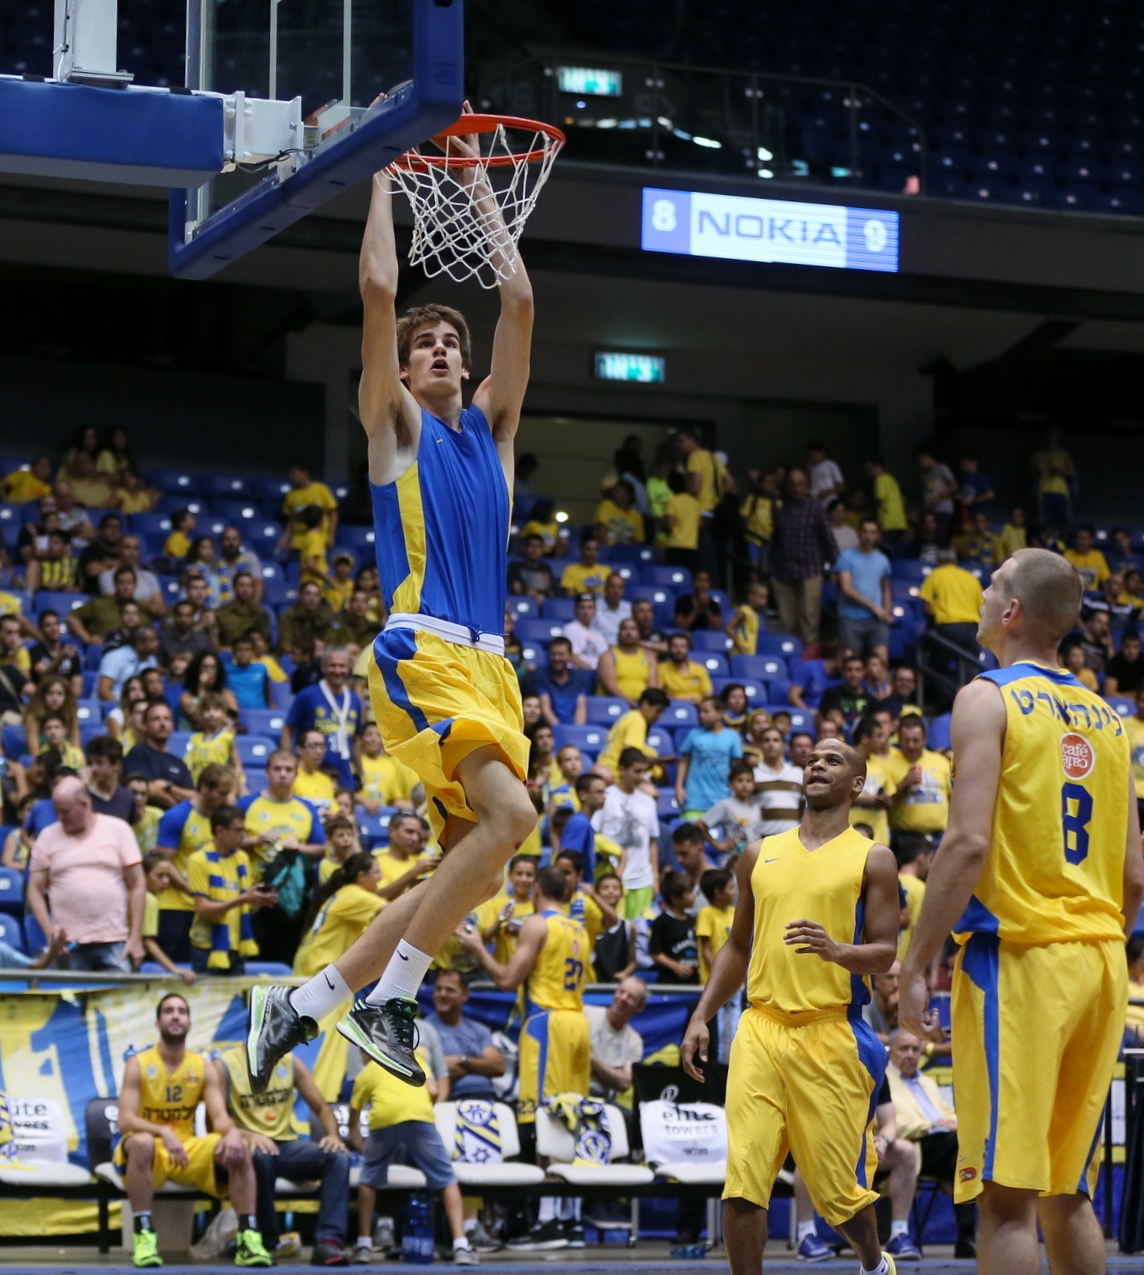 Dragan Bender dreams of dunking one day in the NBA. (Courtesy of Maccabi Tel Aviv BC)